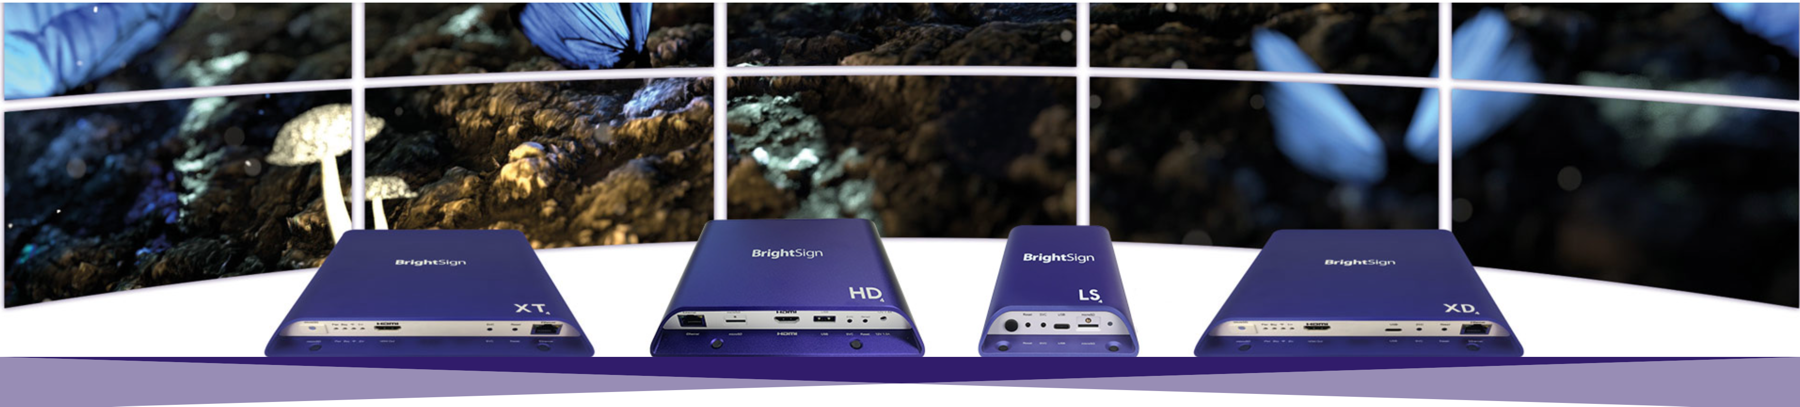 Different models of Brightsign Media Players